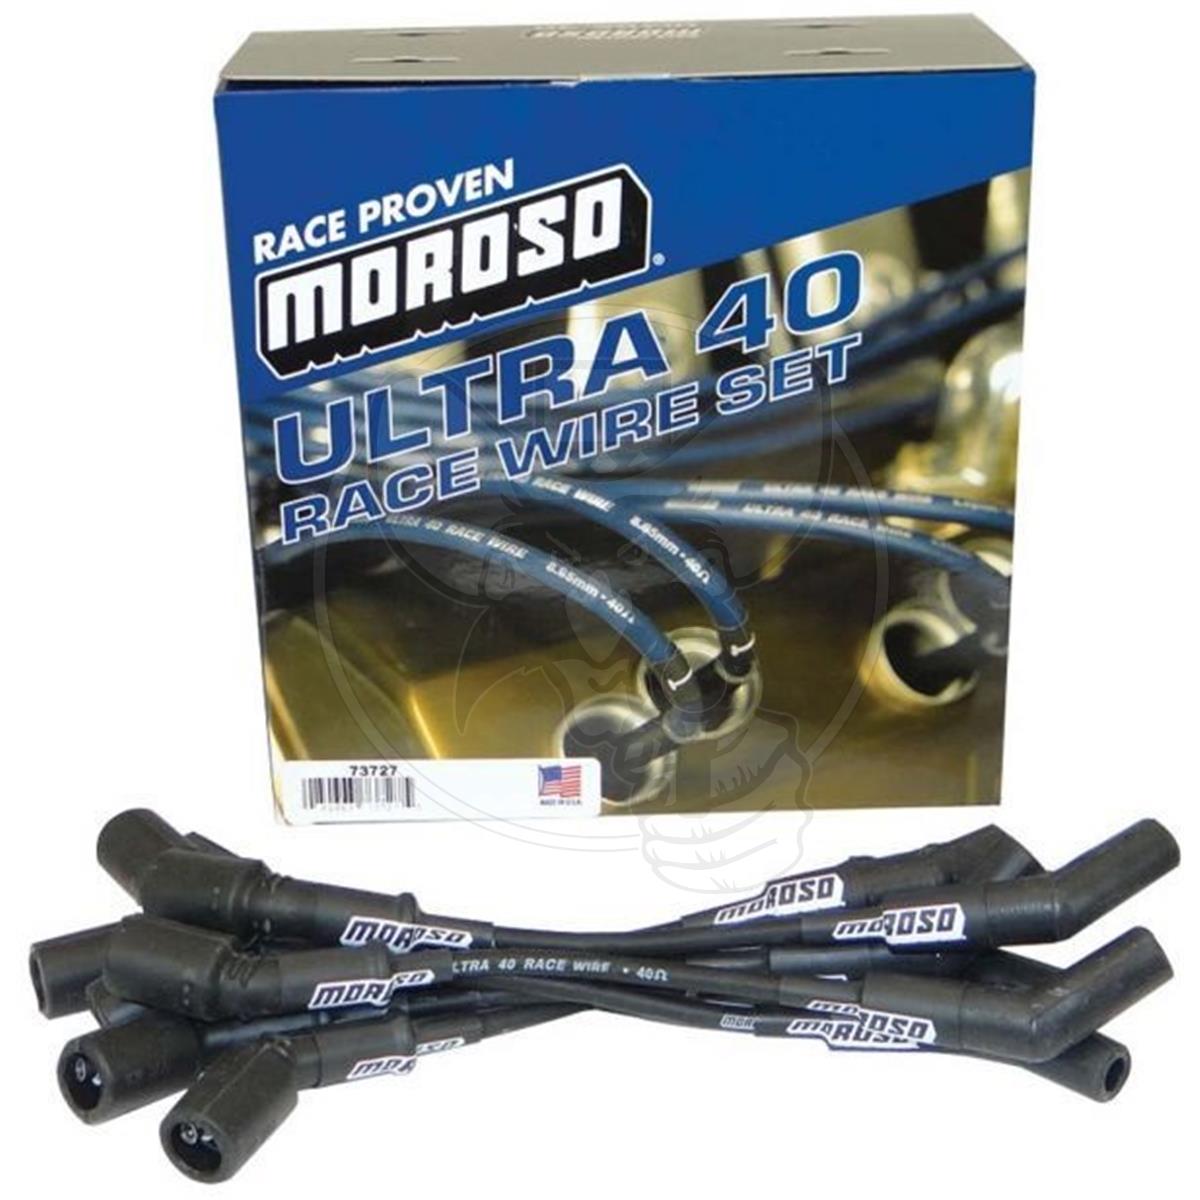 MO73705 - MOROSO SPARK PLUG WIRE SET 8.6MM x 9.75 180° BOOT FITS